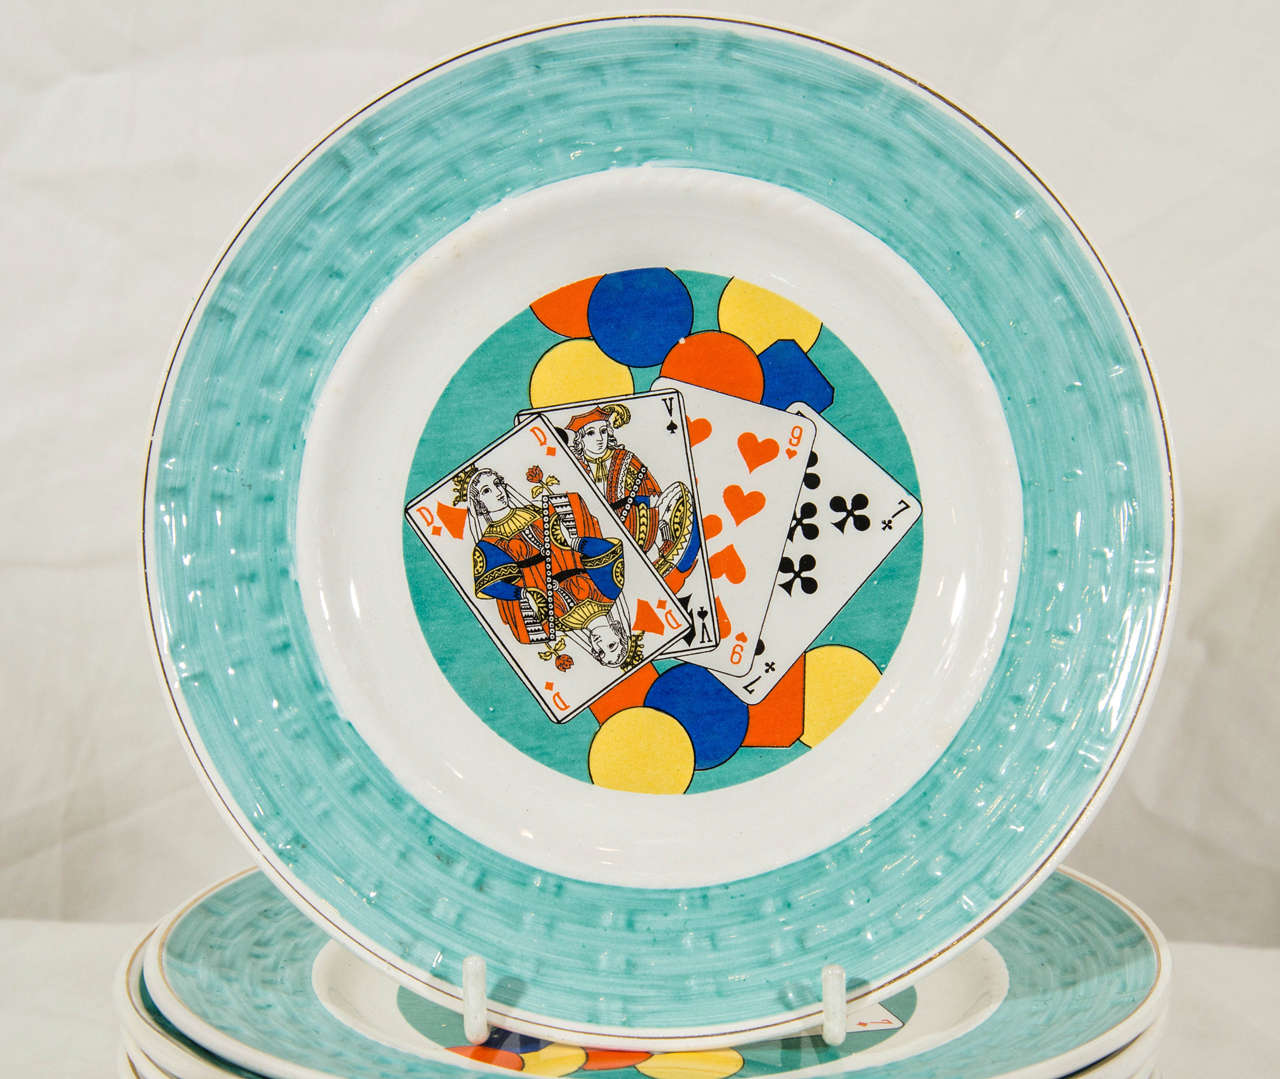 A set of brightly colored French pottery dessert dishes showing playing cards resting on colorful balloons. The borders are impressed with a basket weave design.